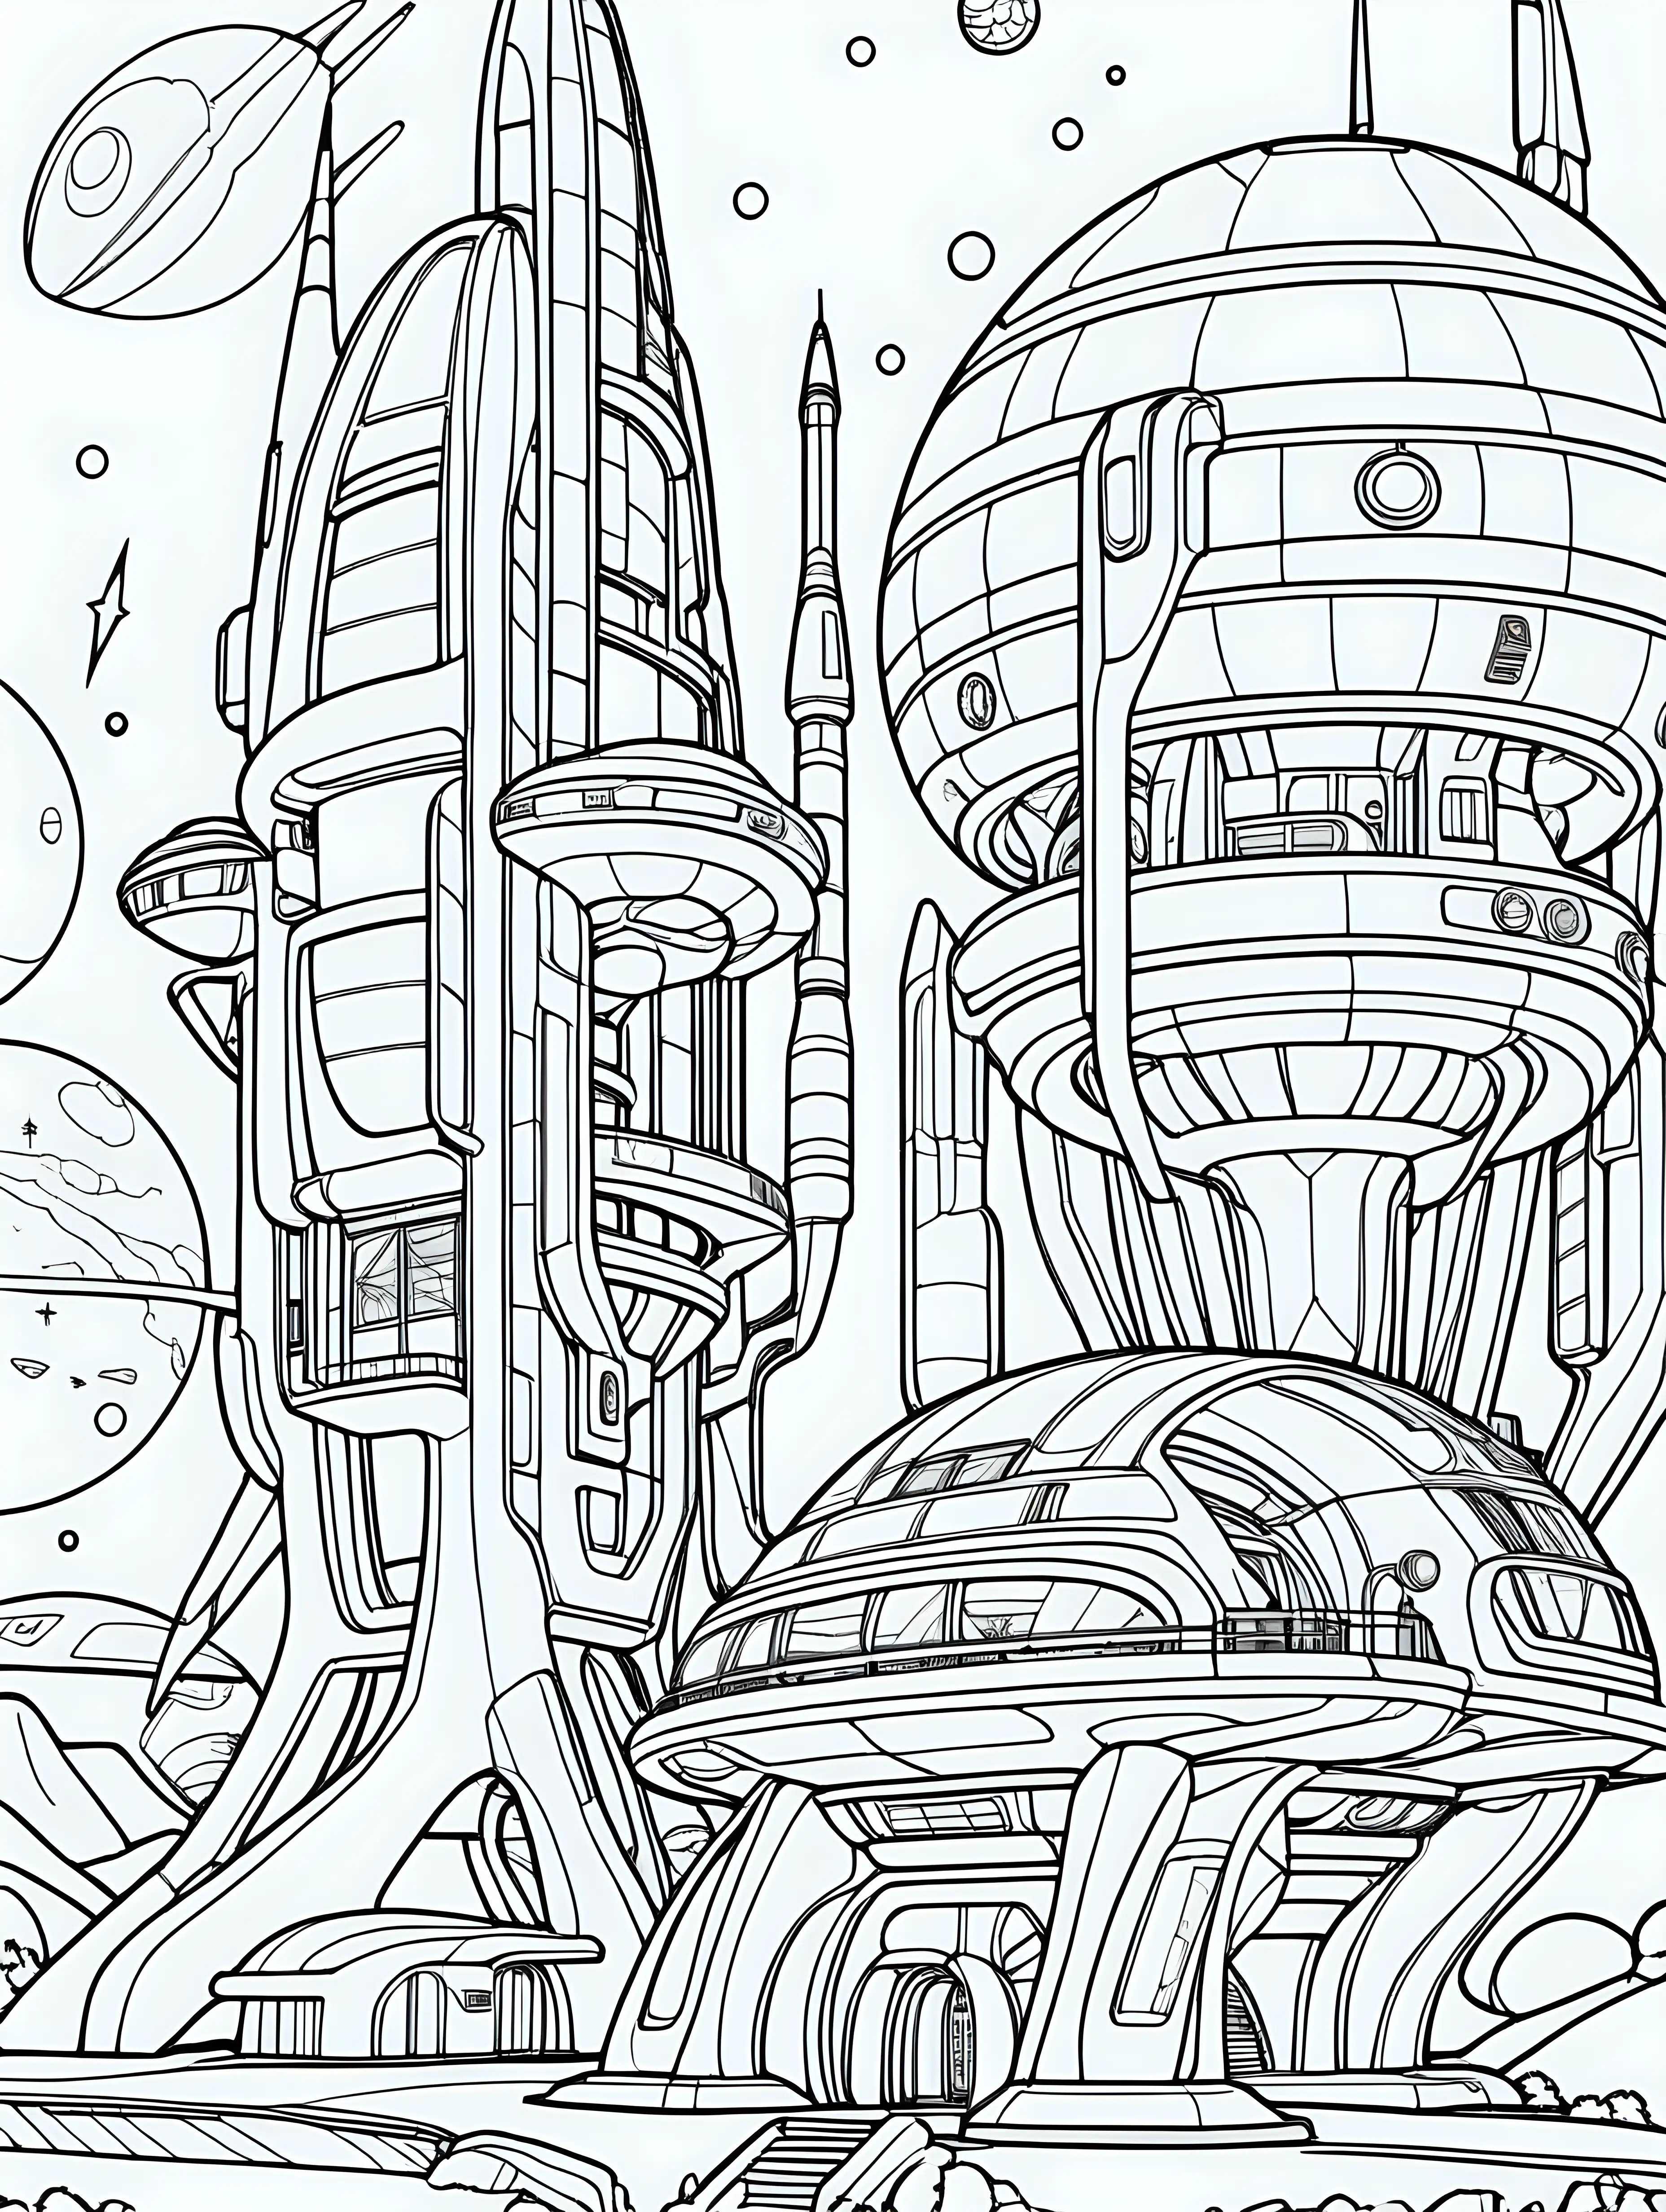 Futuristic SpaceThemed Townhouses Coloring Page for Kids